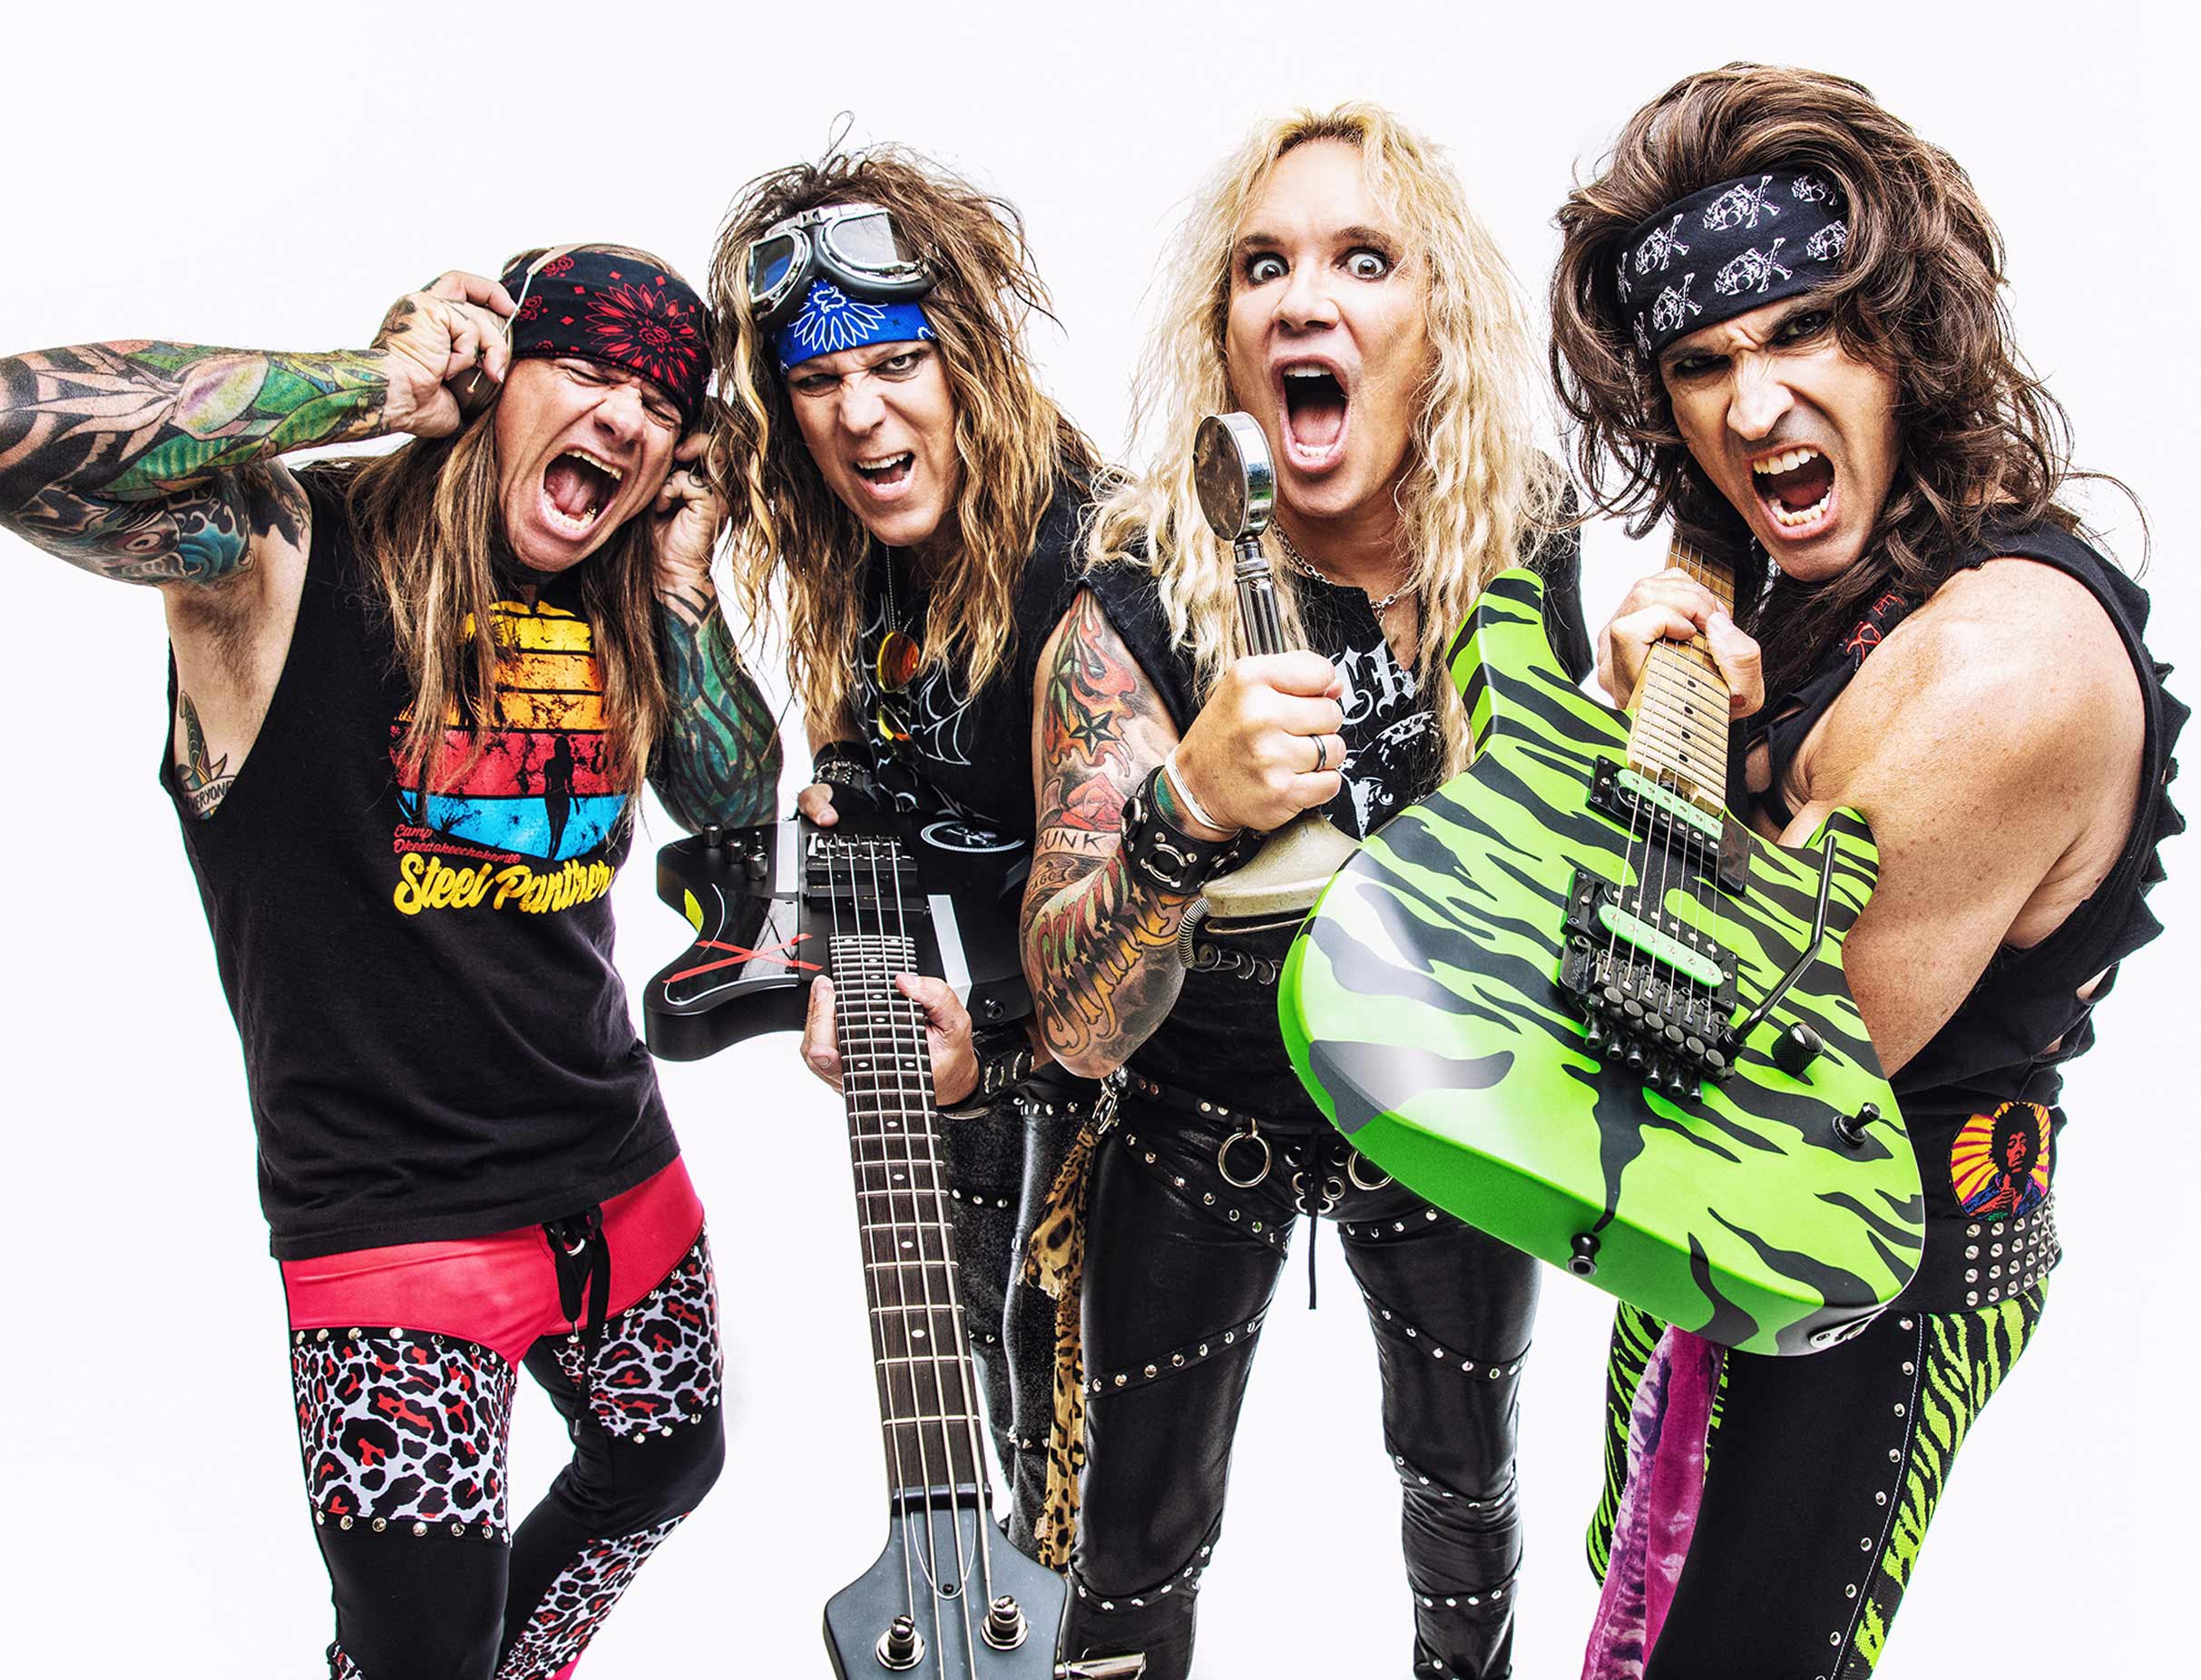 SORRY, THIS EVENT IS NO LONGER ACTIVE<br>Steel Panther at The District - Sioux Falls, SD 57106